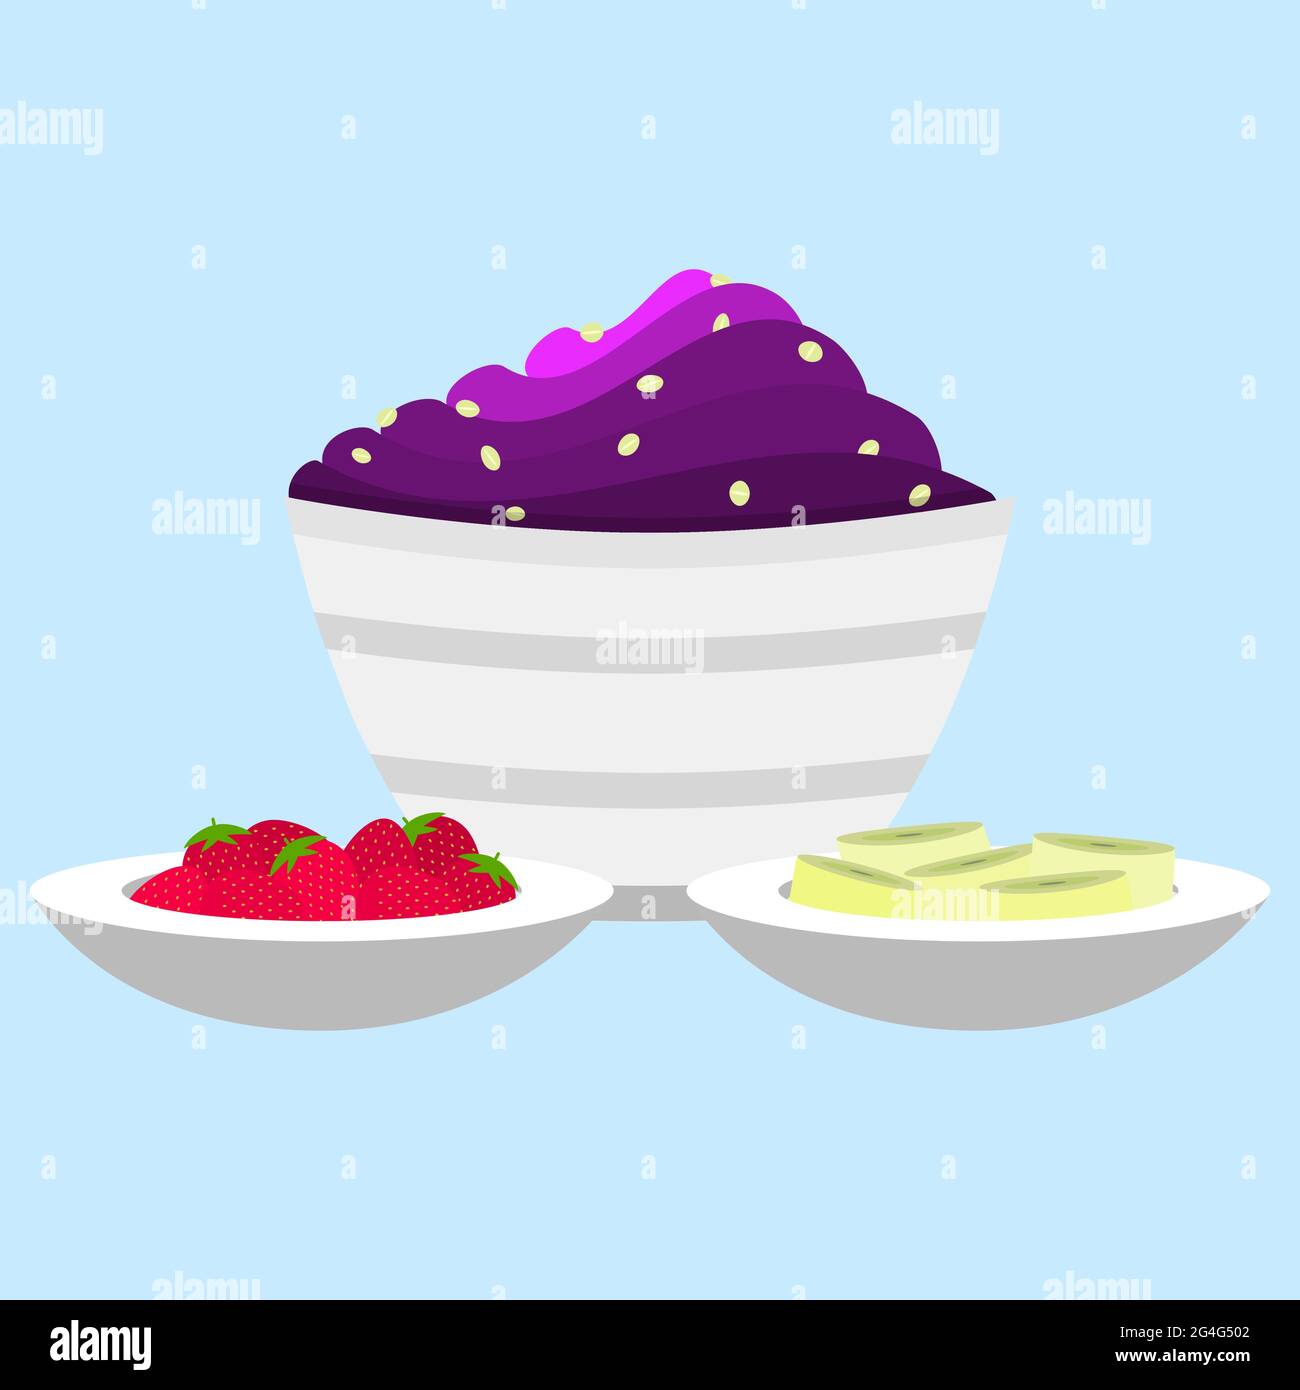 Bowl of acai cream with granola. Beside, bowls of strawberries and banana slices as a side dish. Stock Vector